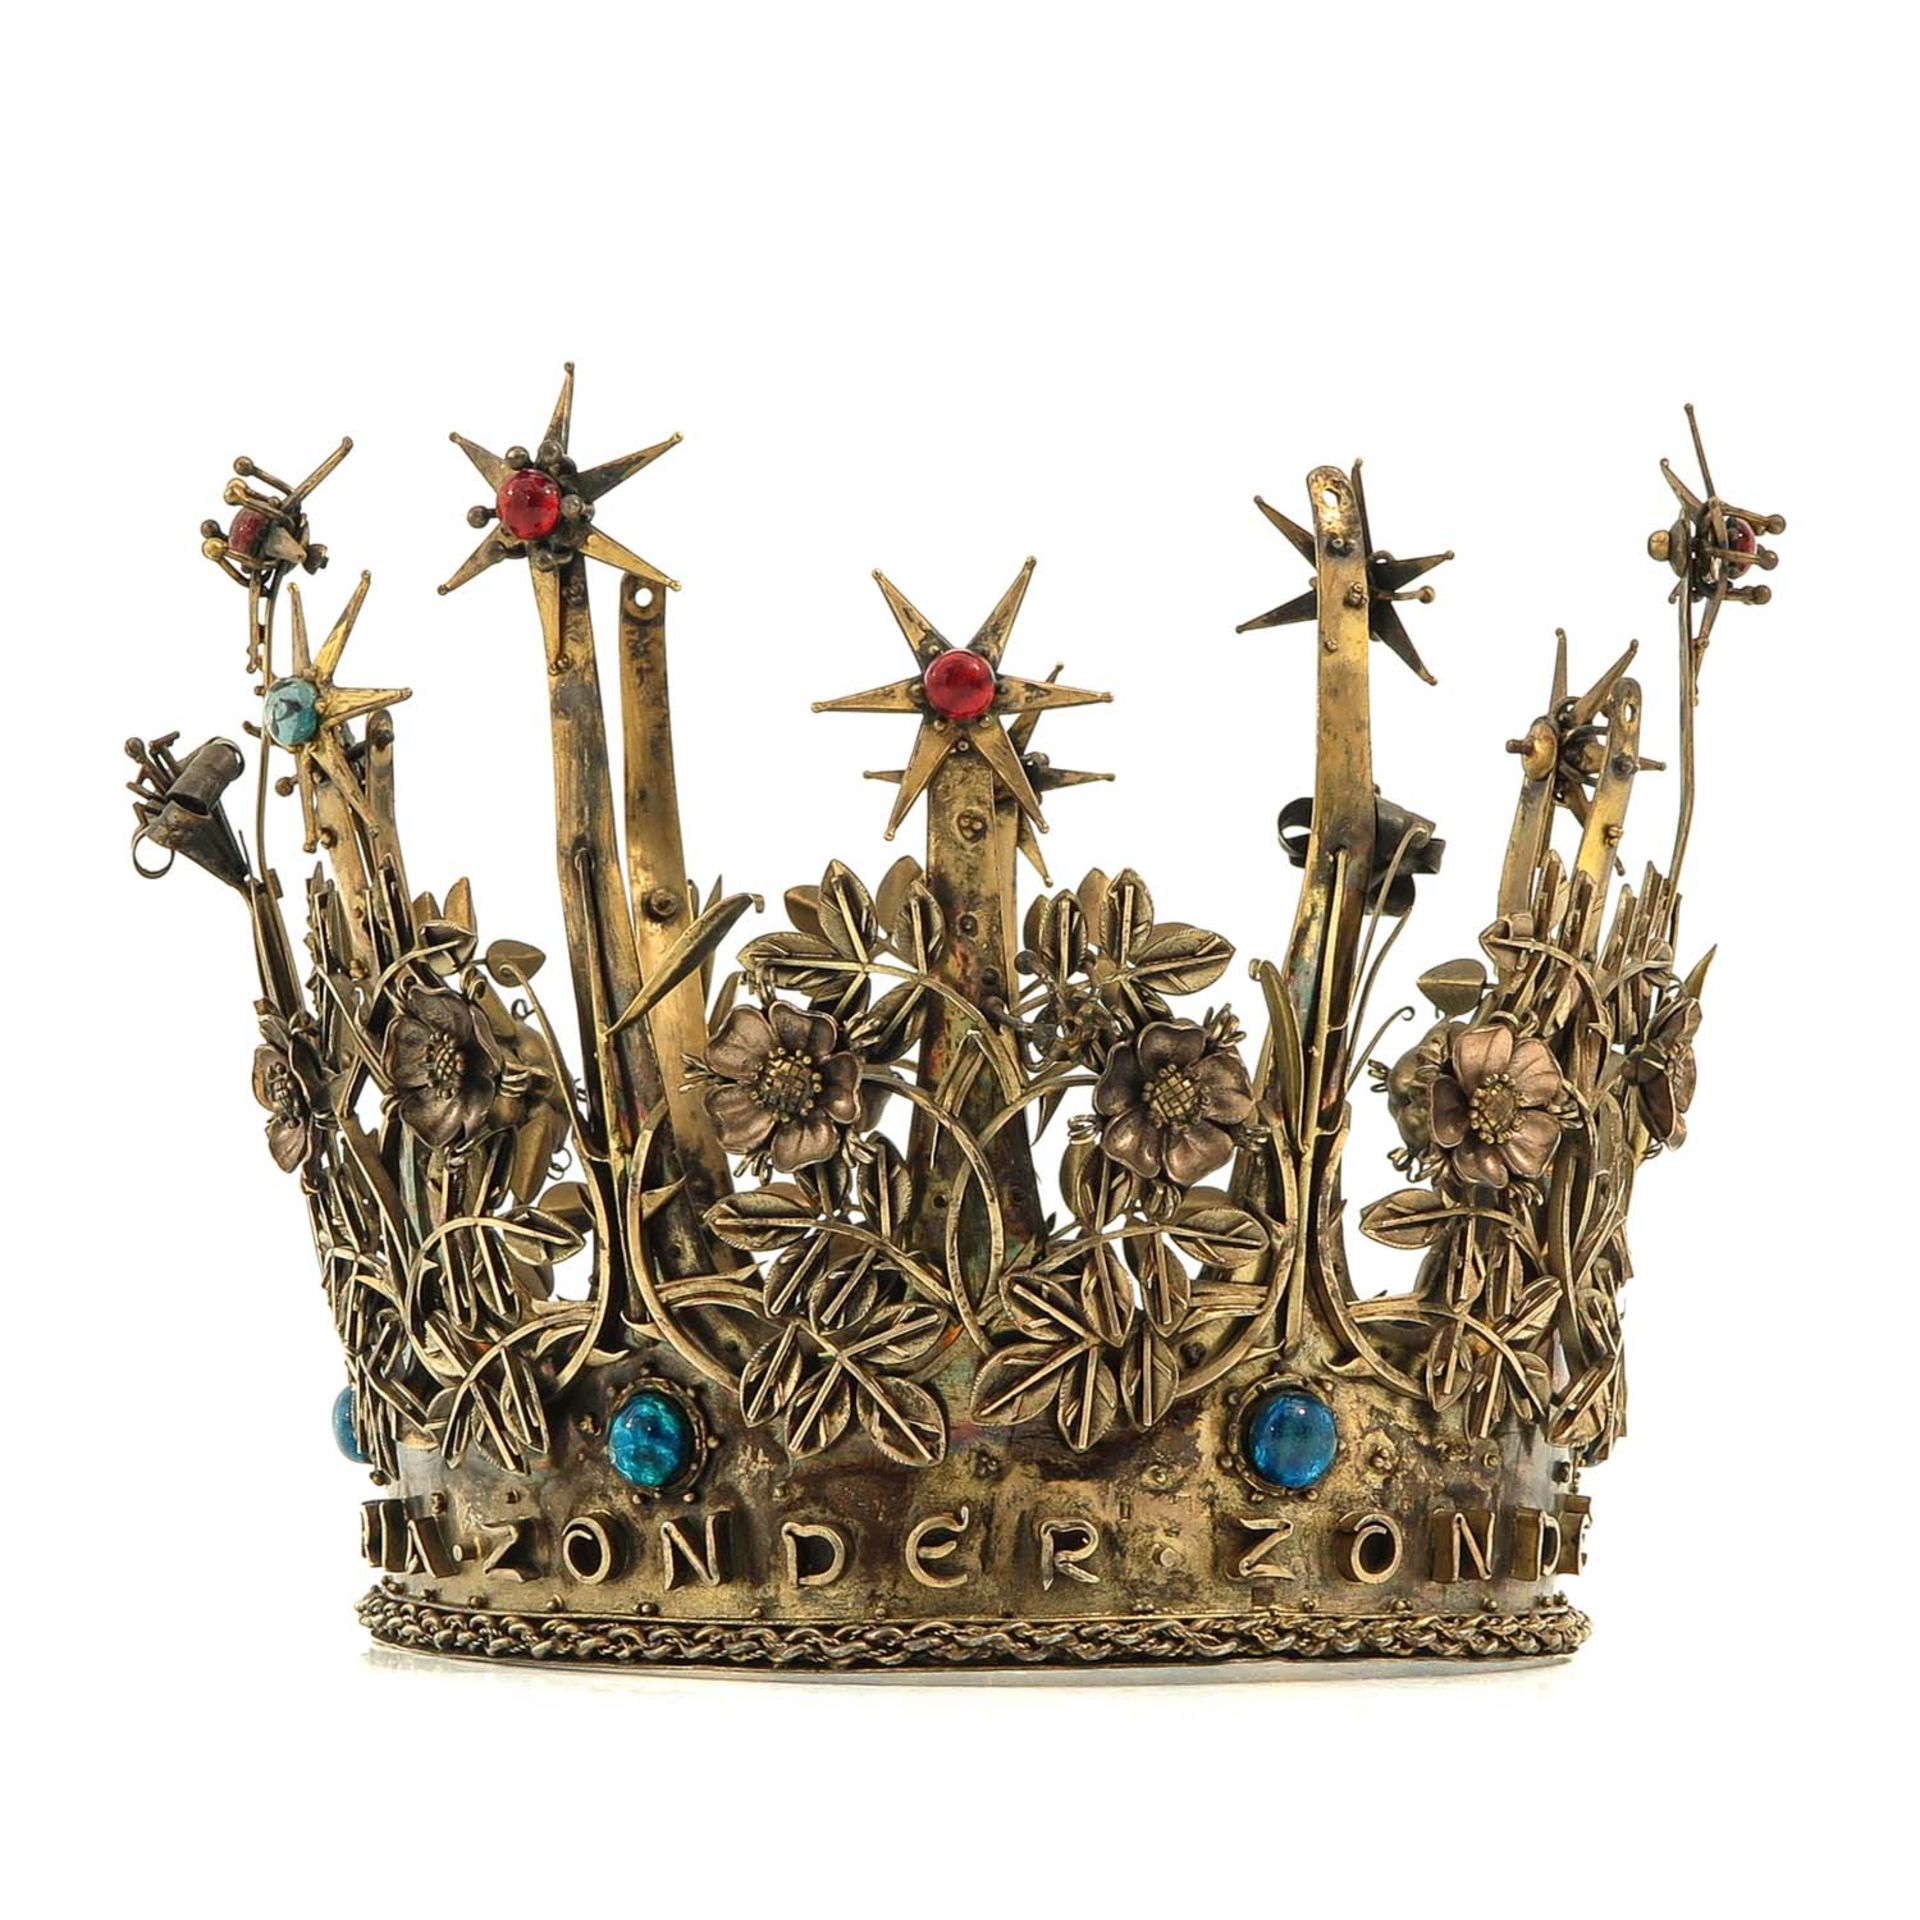 A Beautiful Crown for a Saint Sculpture - Image 2 of 9